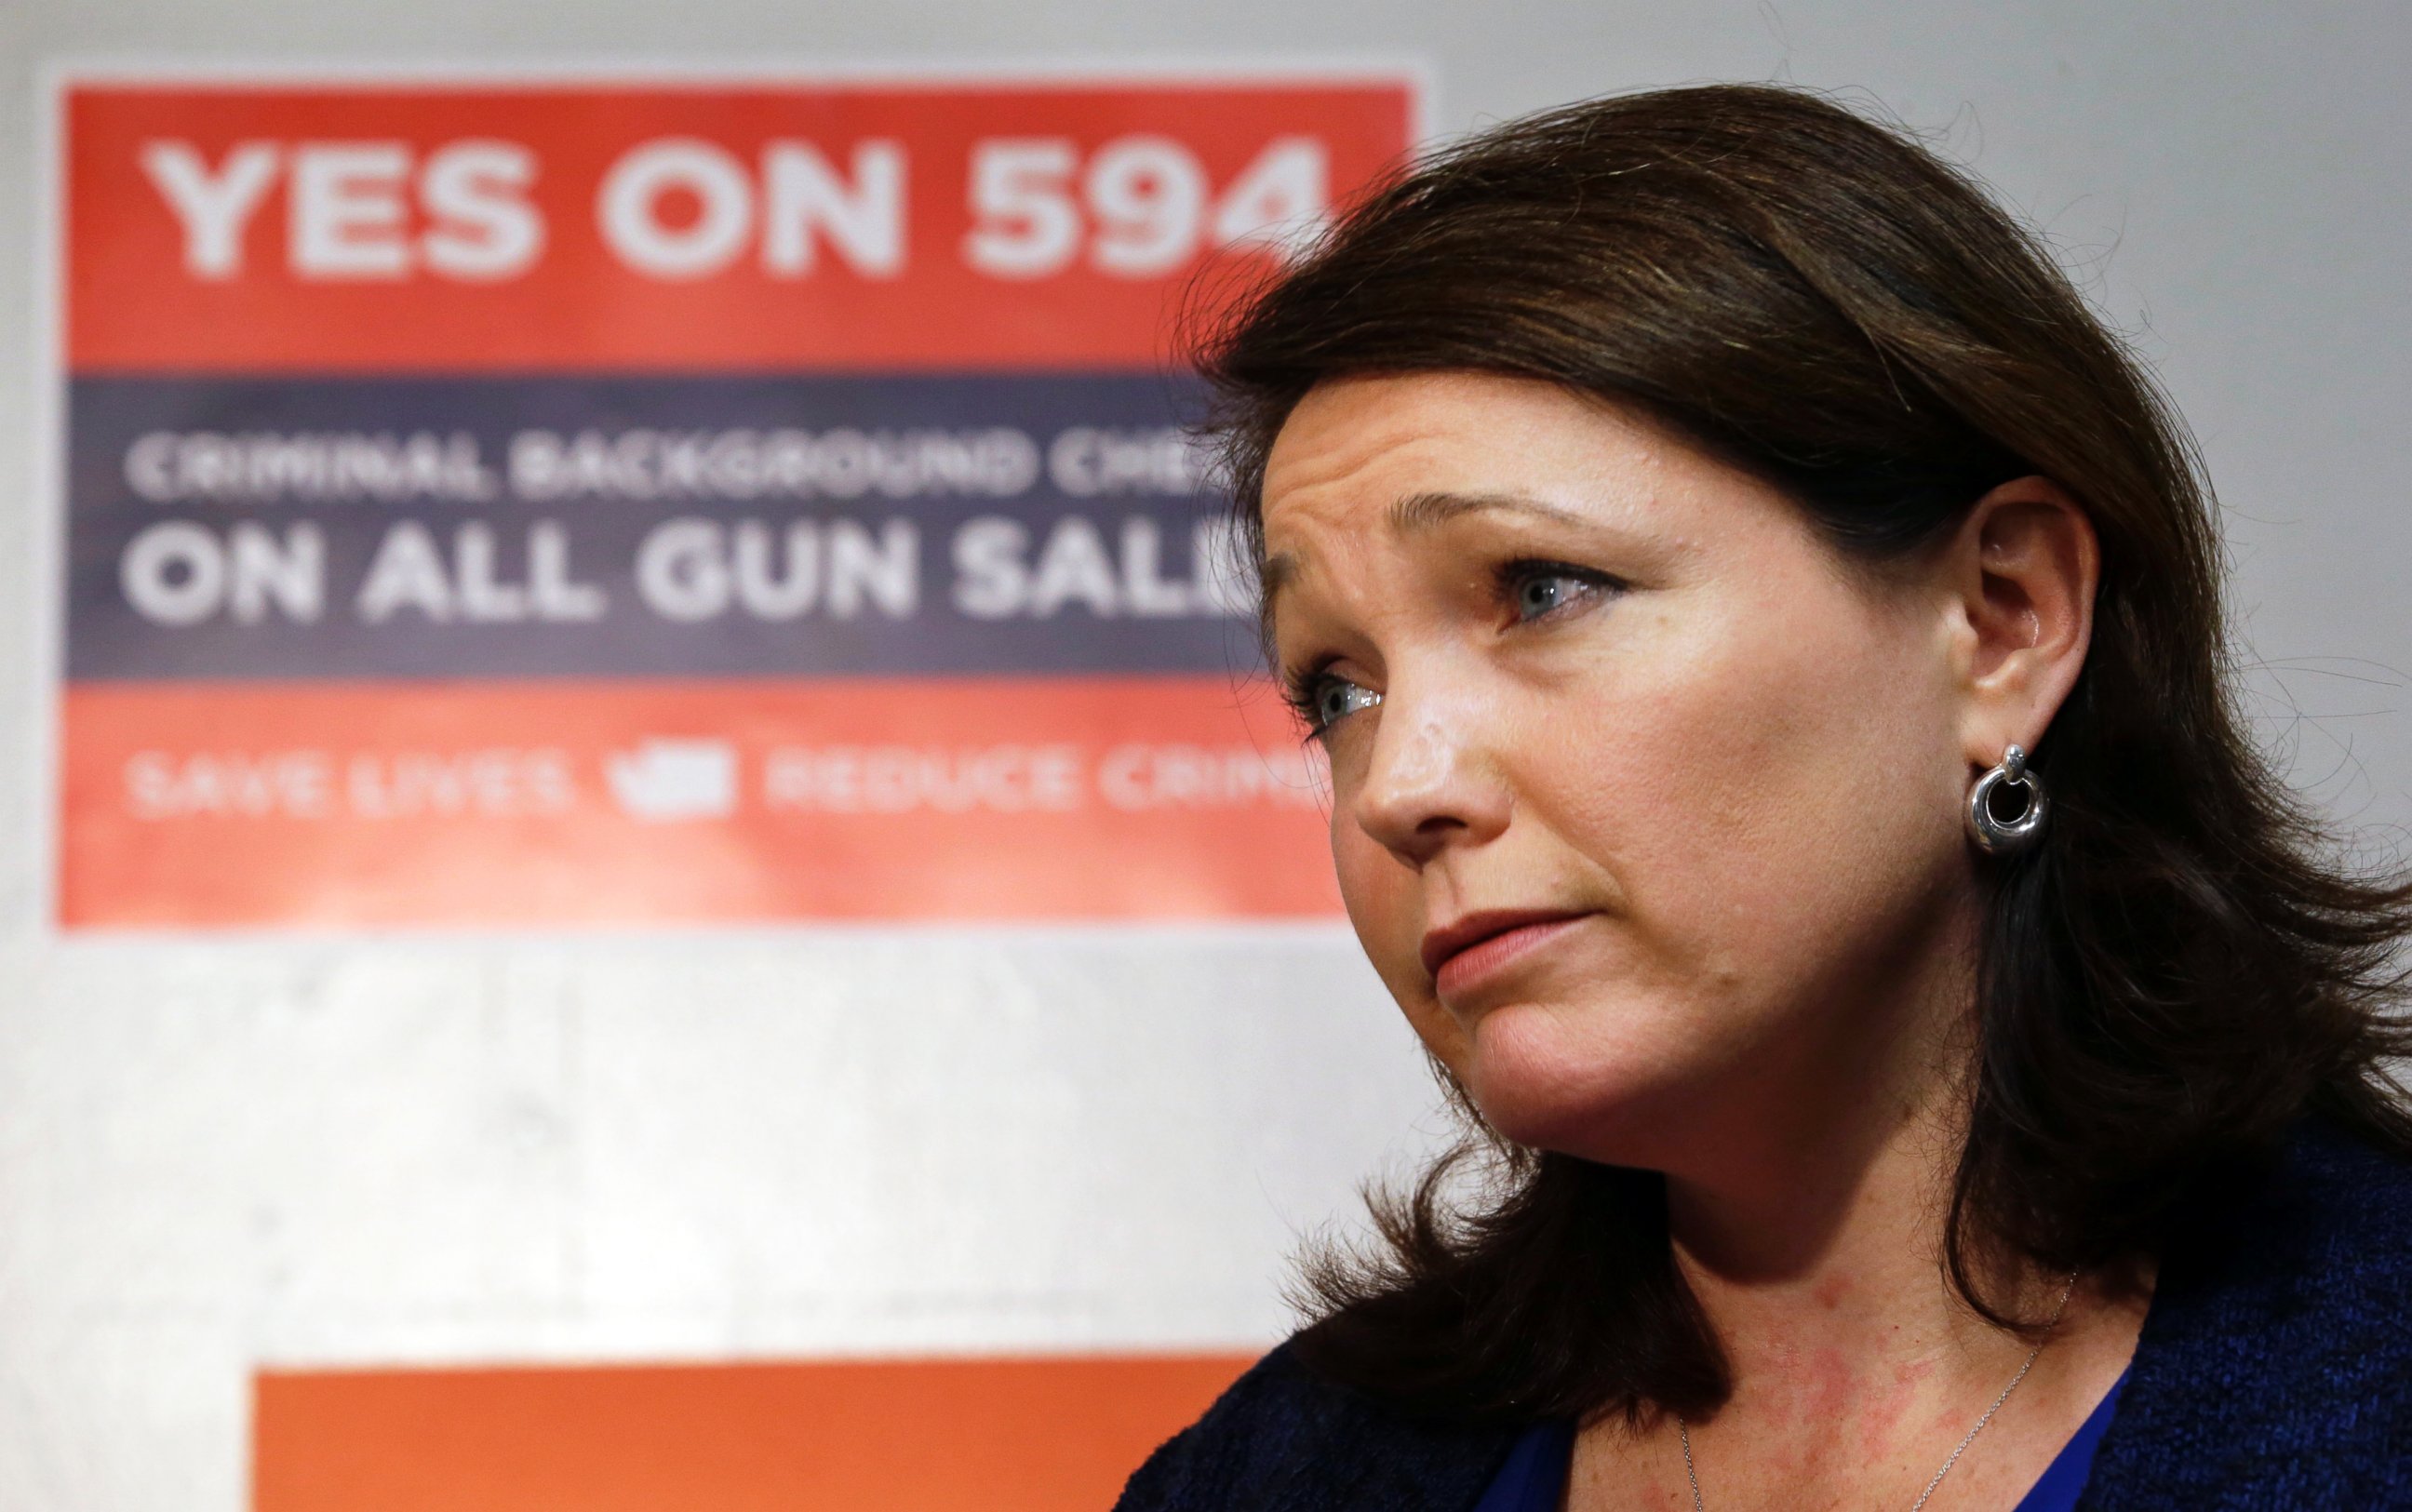 PHOTO: Nicole Hockley is interviewed before working at a phone bank in support of Washington's Initiative 594, a measure seeking universal background checks on gun sales and transfers, Oct. 27, 2014, in Seattle.